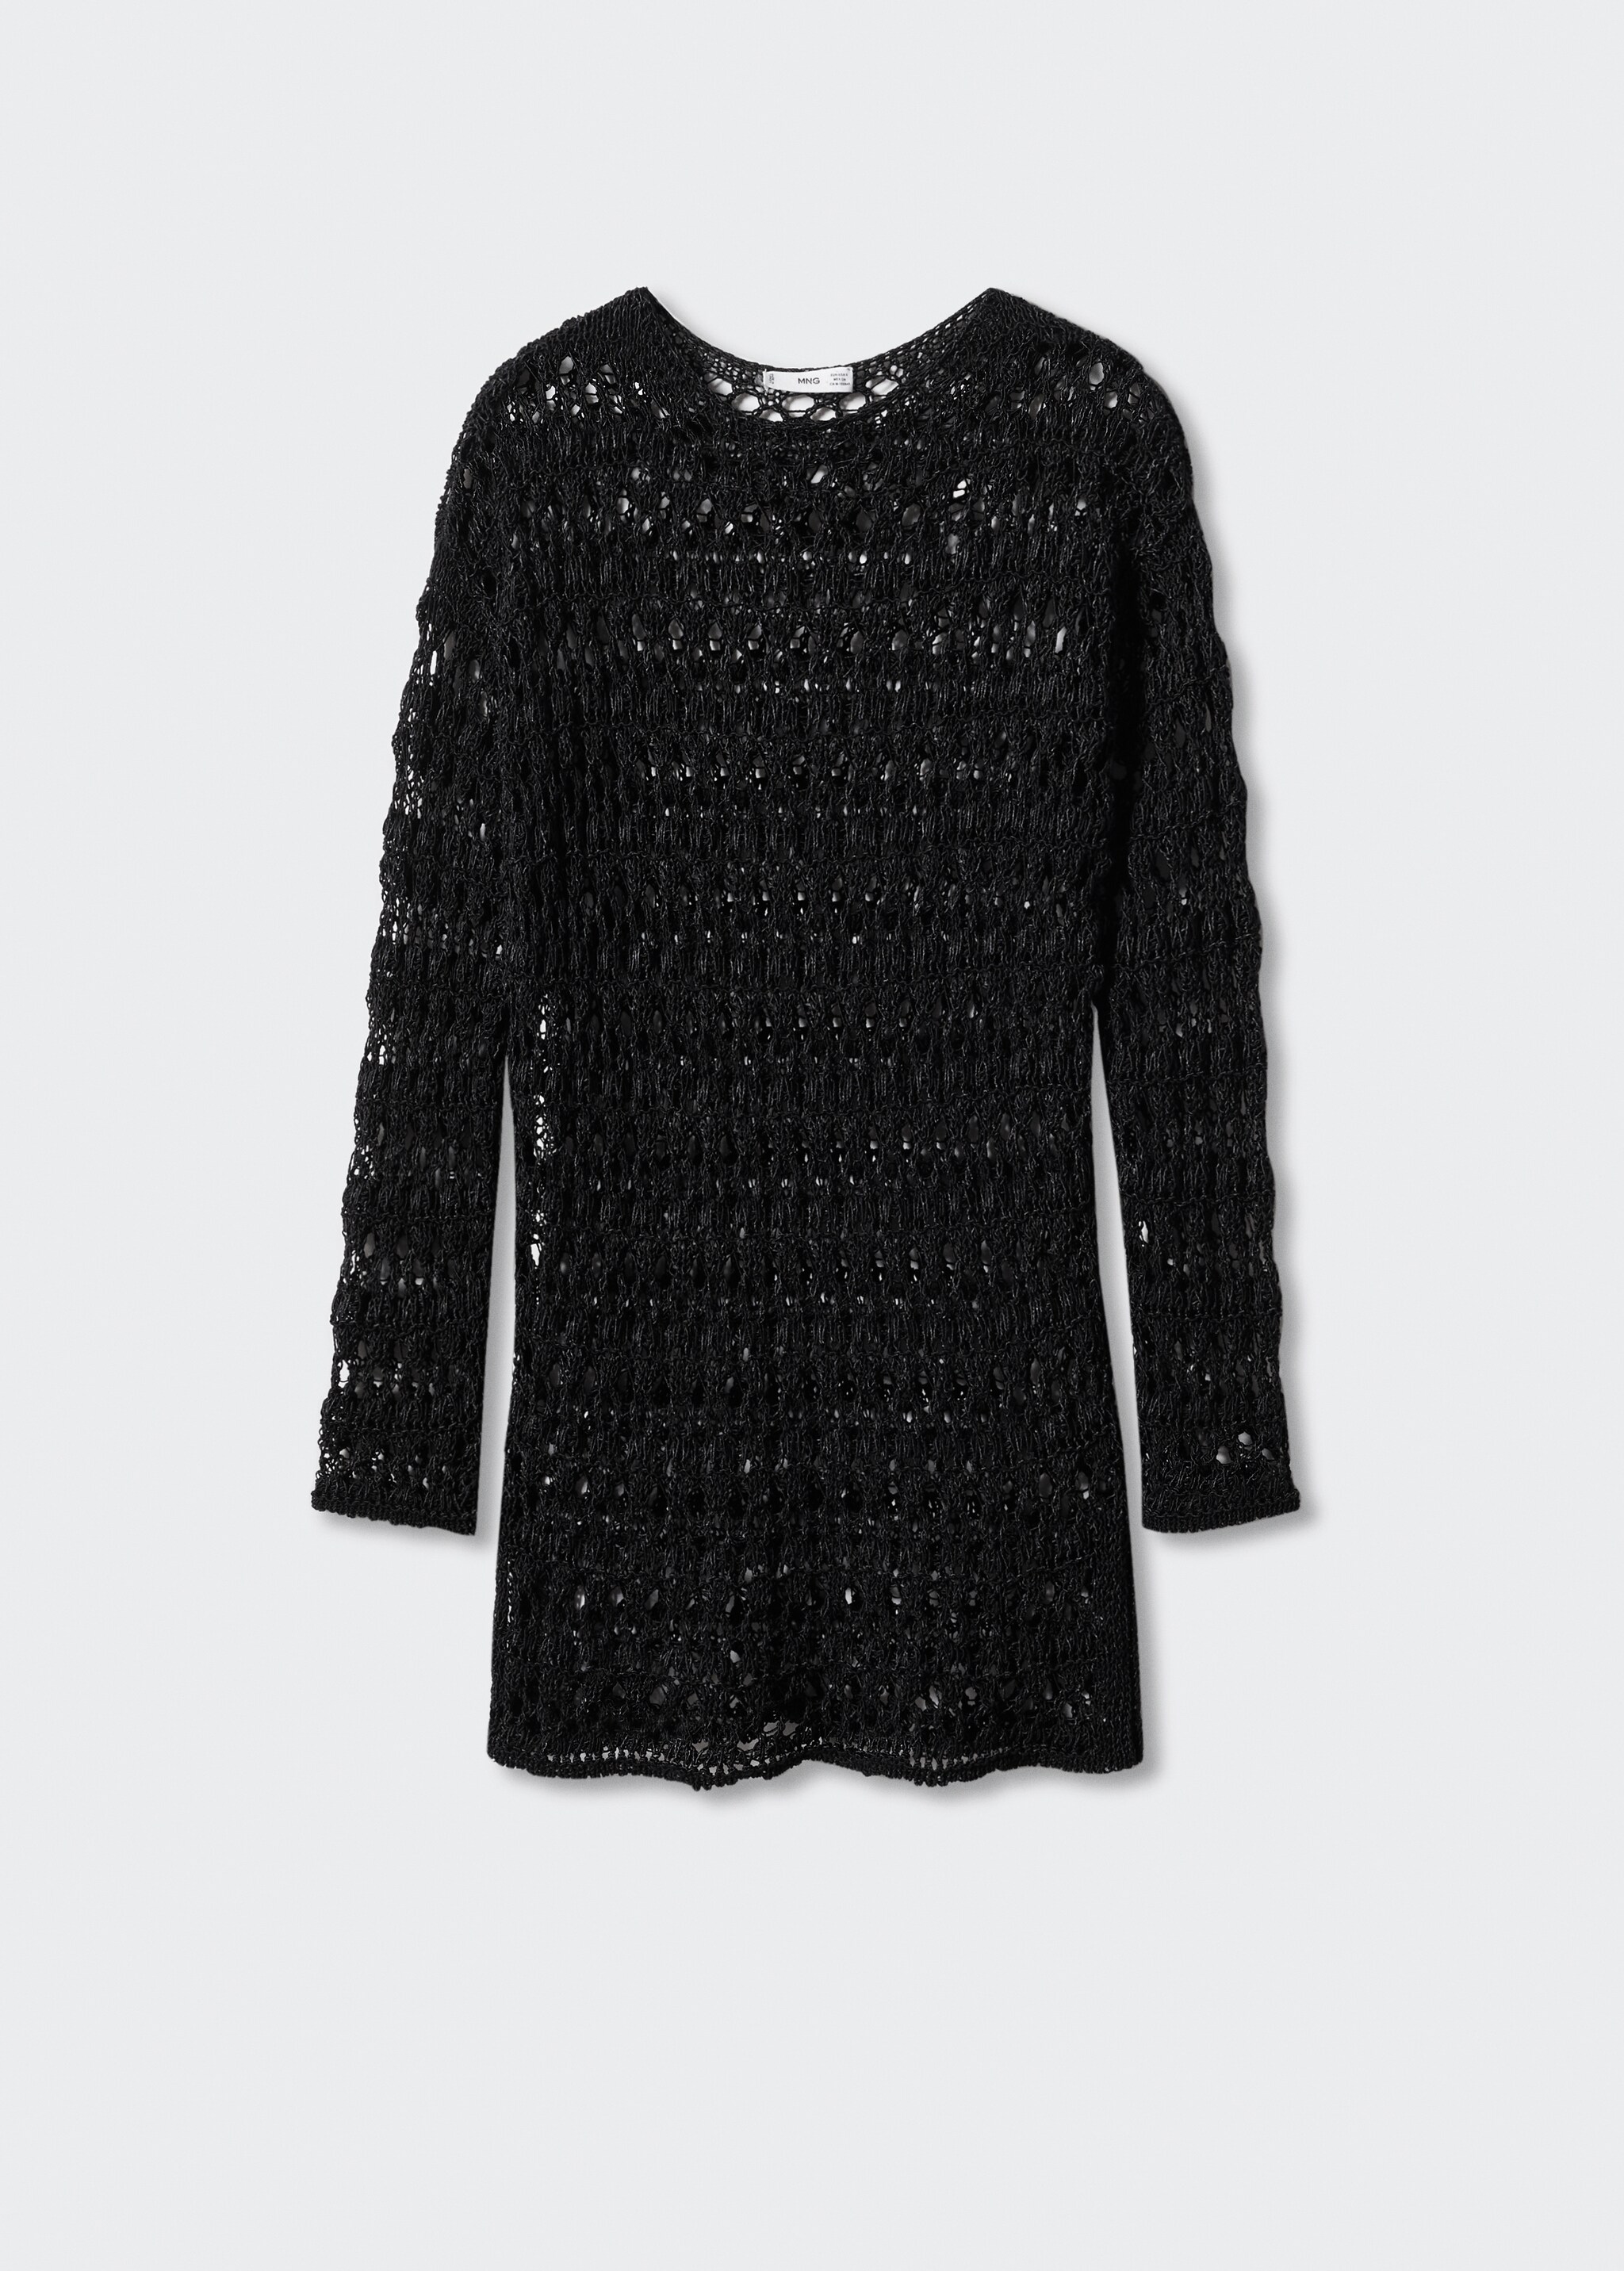 Knit openwork sweater - Article without model